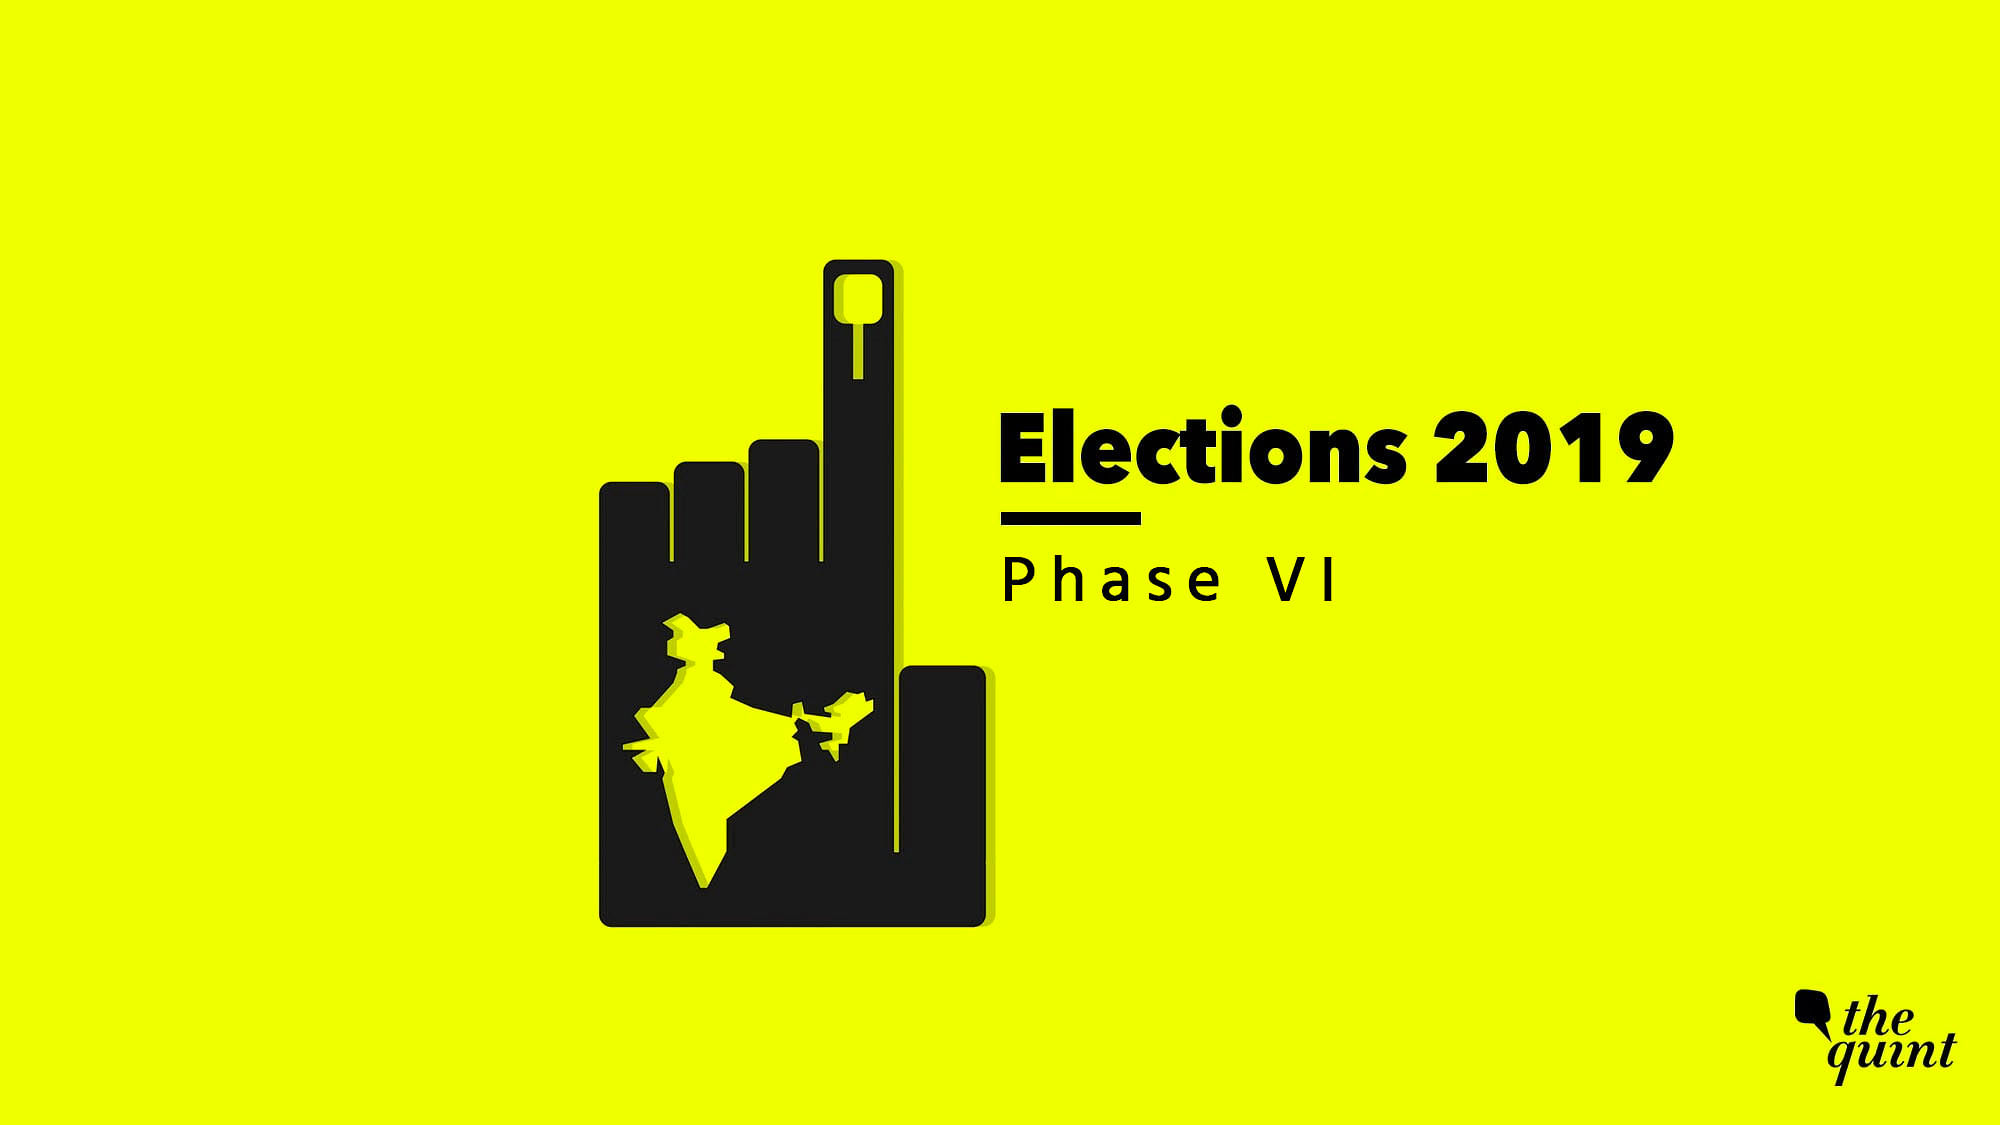 Lok Sabha Election 2019: Here’s a full list of constituencies voting in the phase 6 of Lok Sabha elections.